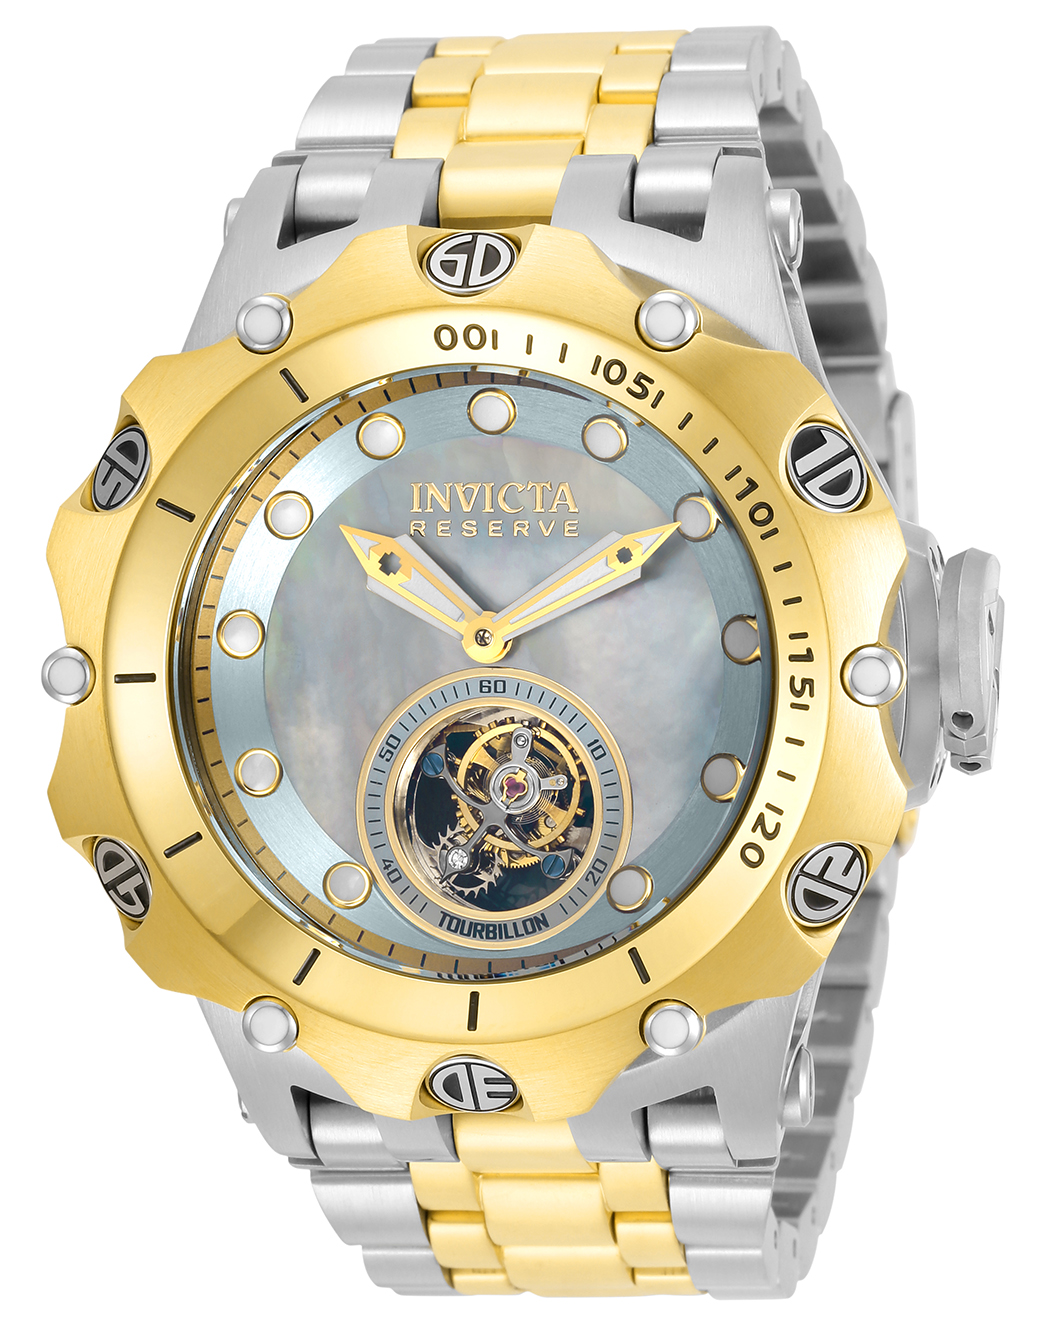 Invicta Reserve Venom Mechanical Mens Watch - 51mm Stainless Steel Case, Stainless Steel Band, Steel, Gold (32675)